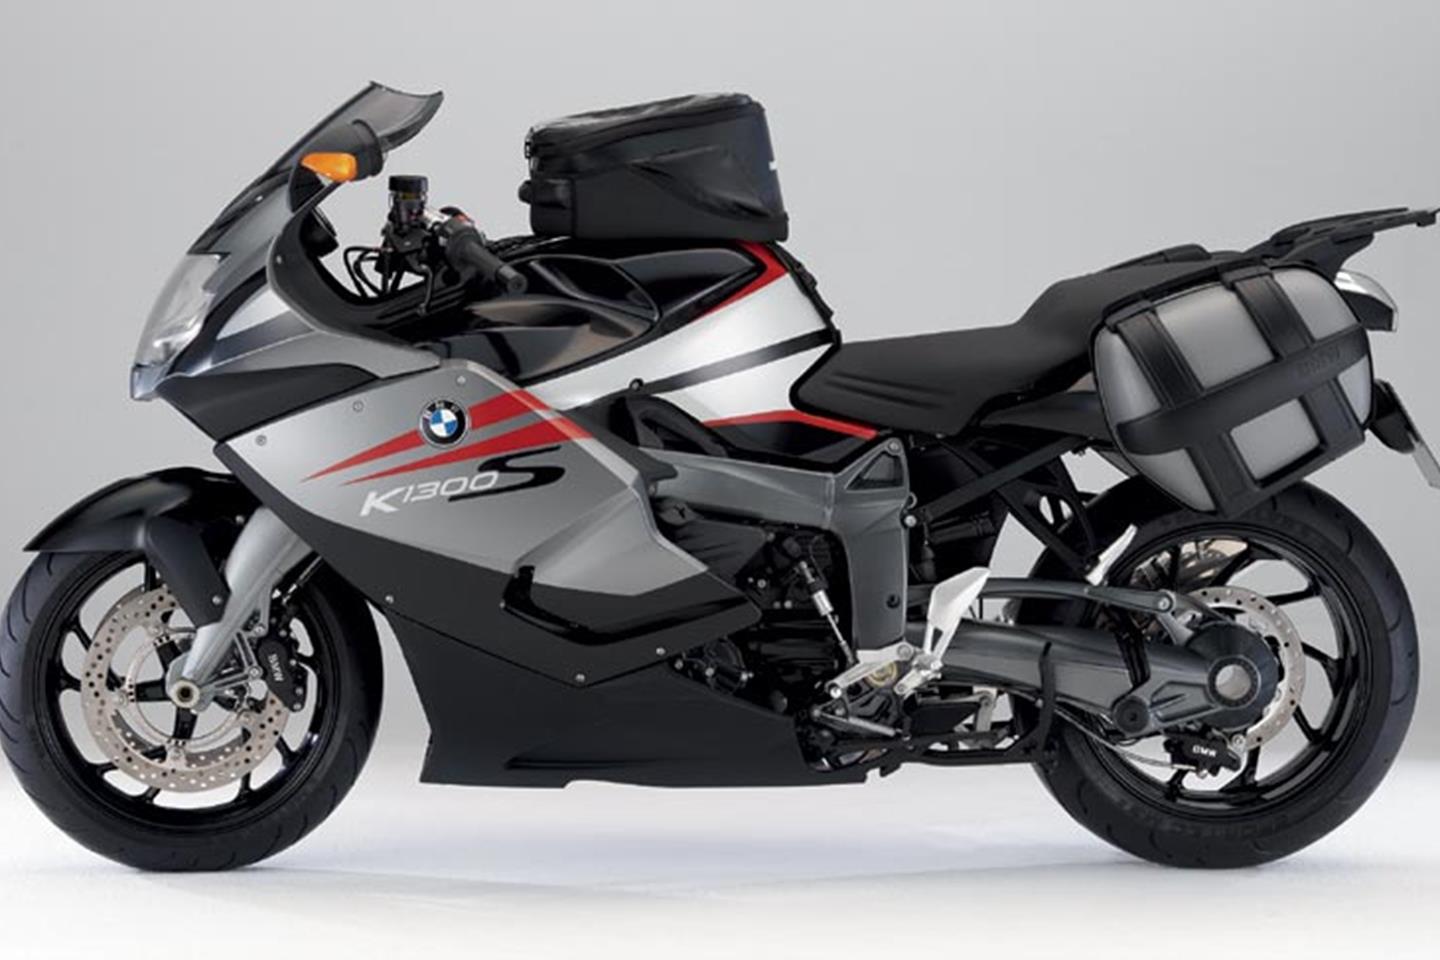 BMW K1300S (2009-2016) Review | Owner & Expert Ratings